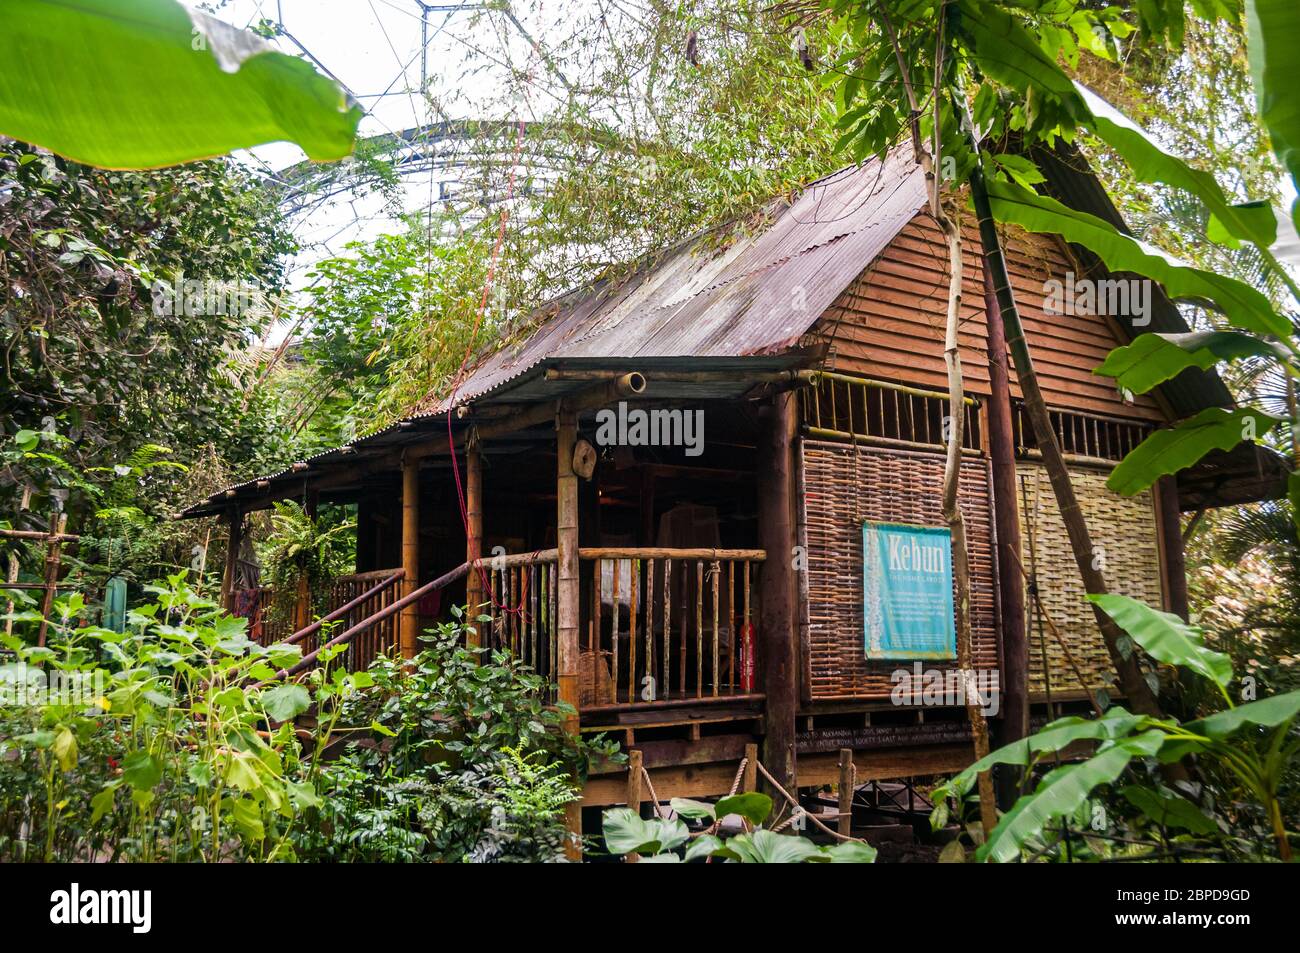 The Malaysian House, a traditional home from a Sabah, Borneo kampong in the Rainforest Biome of the Eden Project, Cornwall, Great Britain Stock Photo